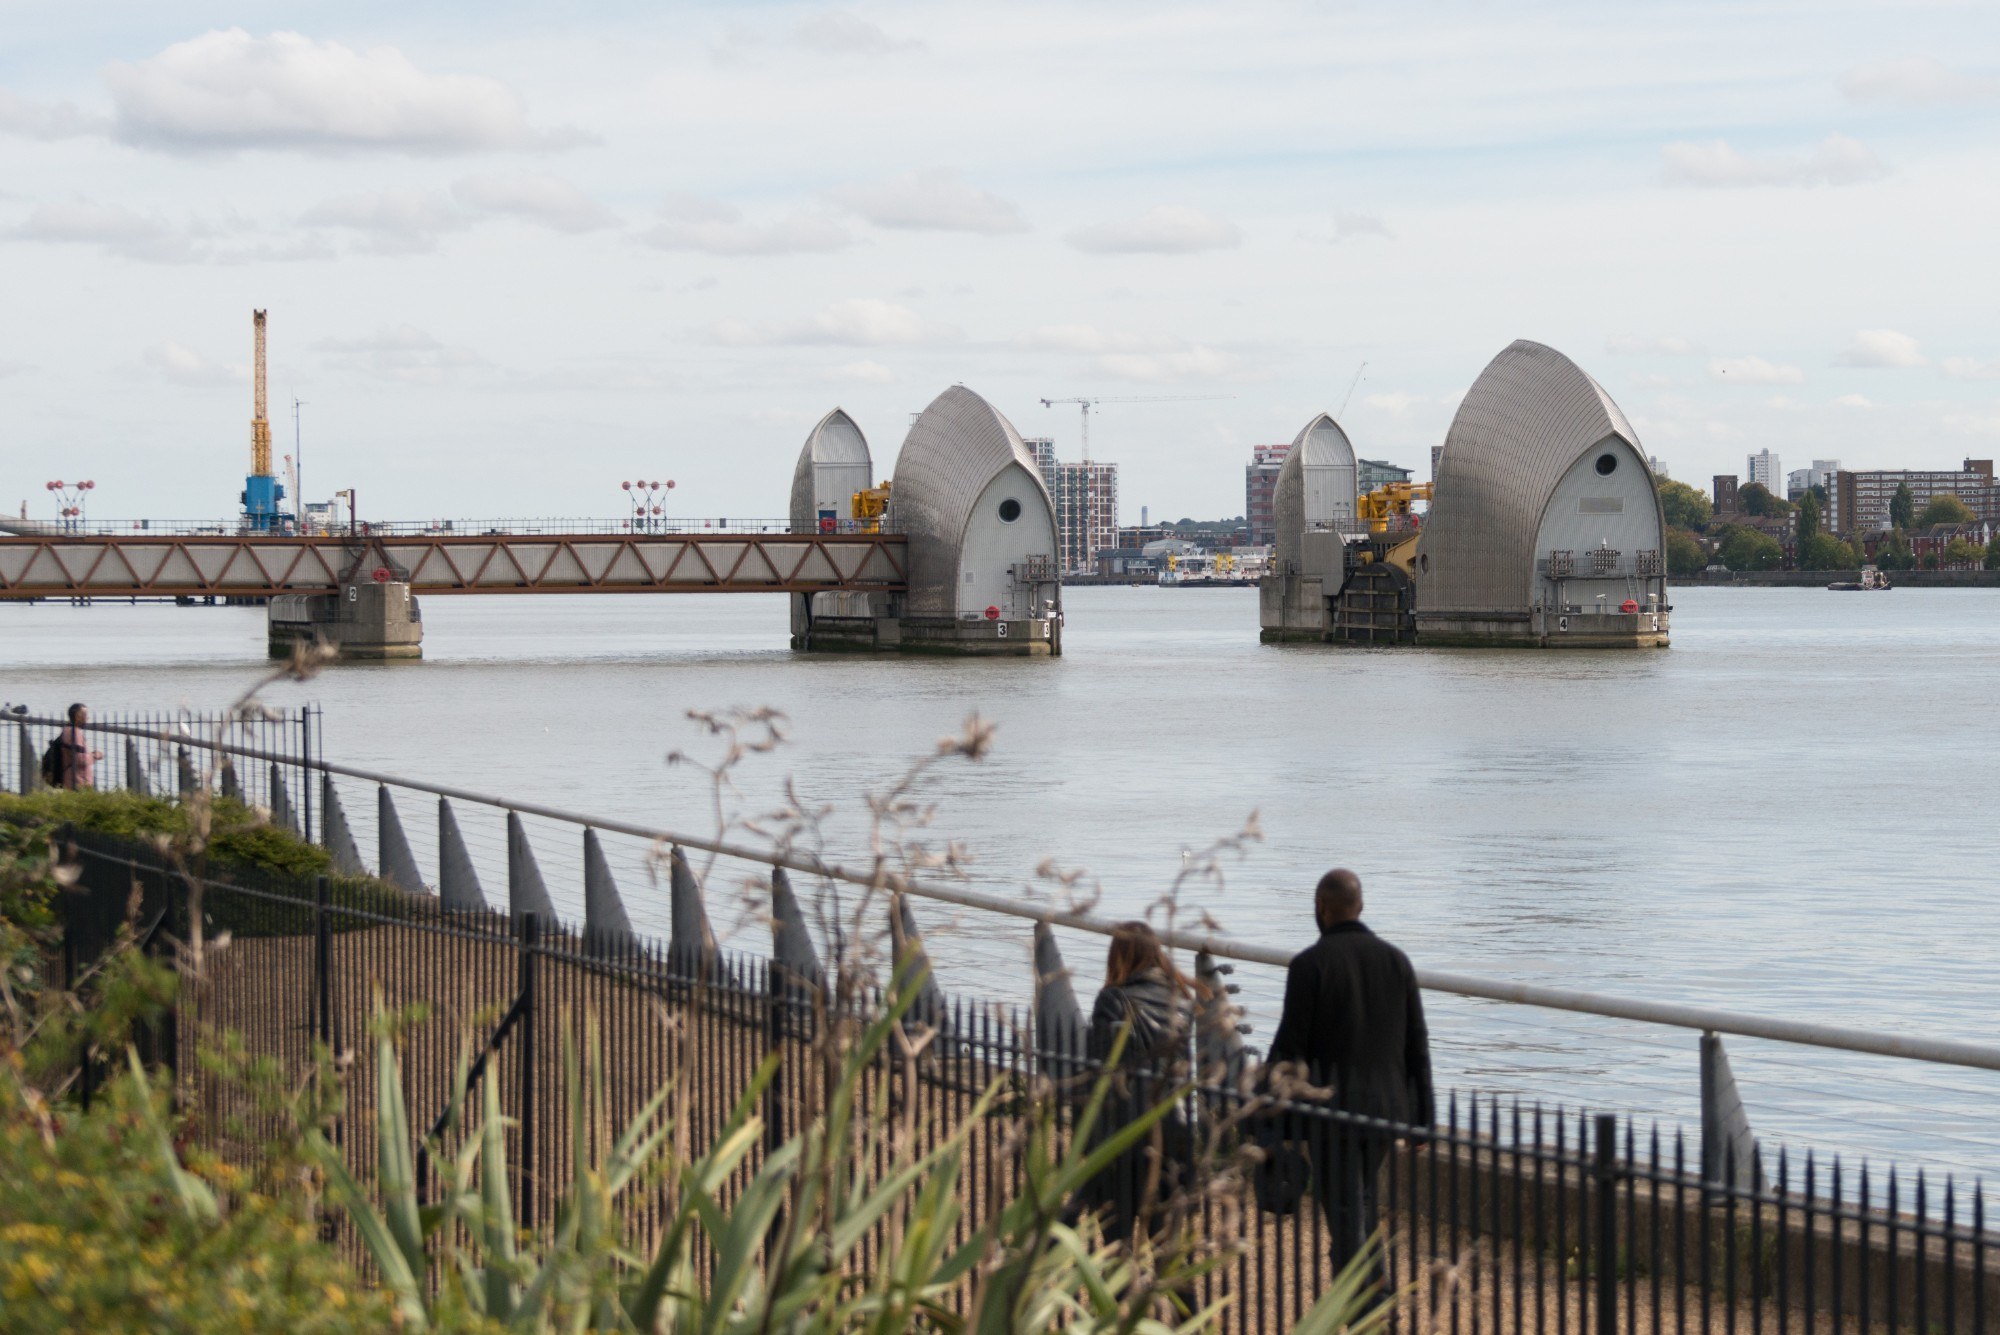 The Thames Barrier whilst open